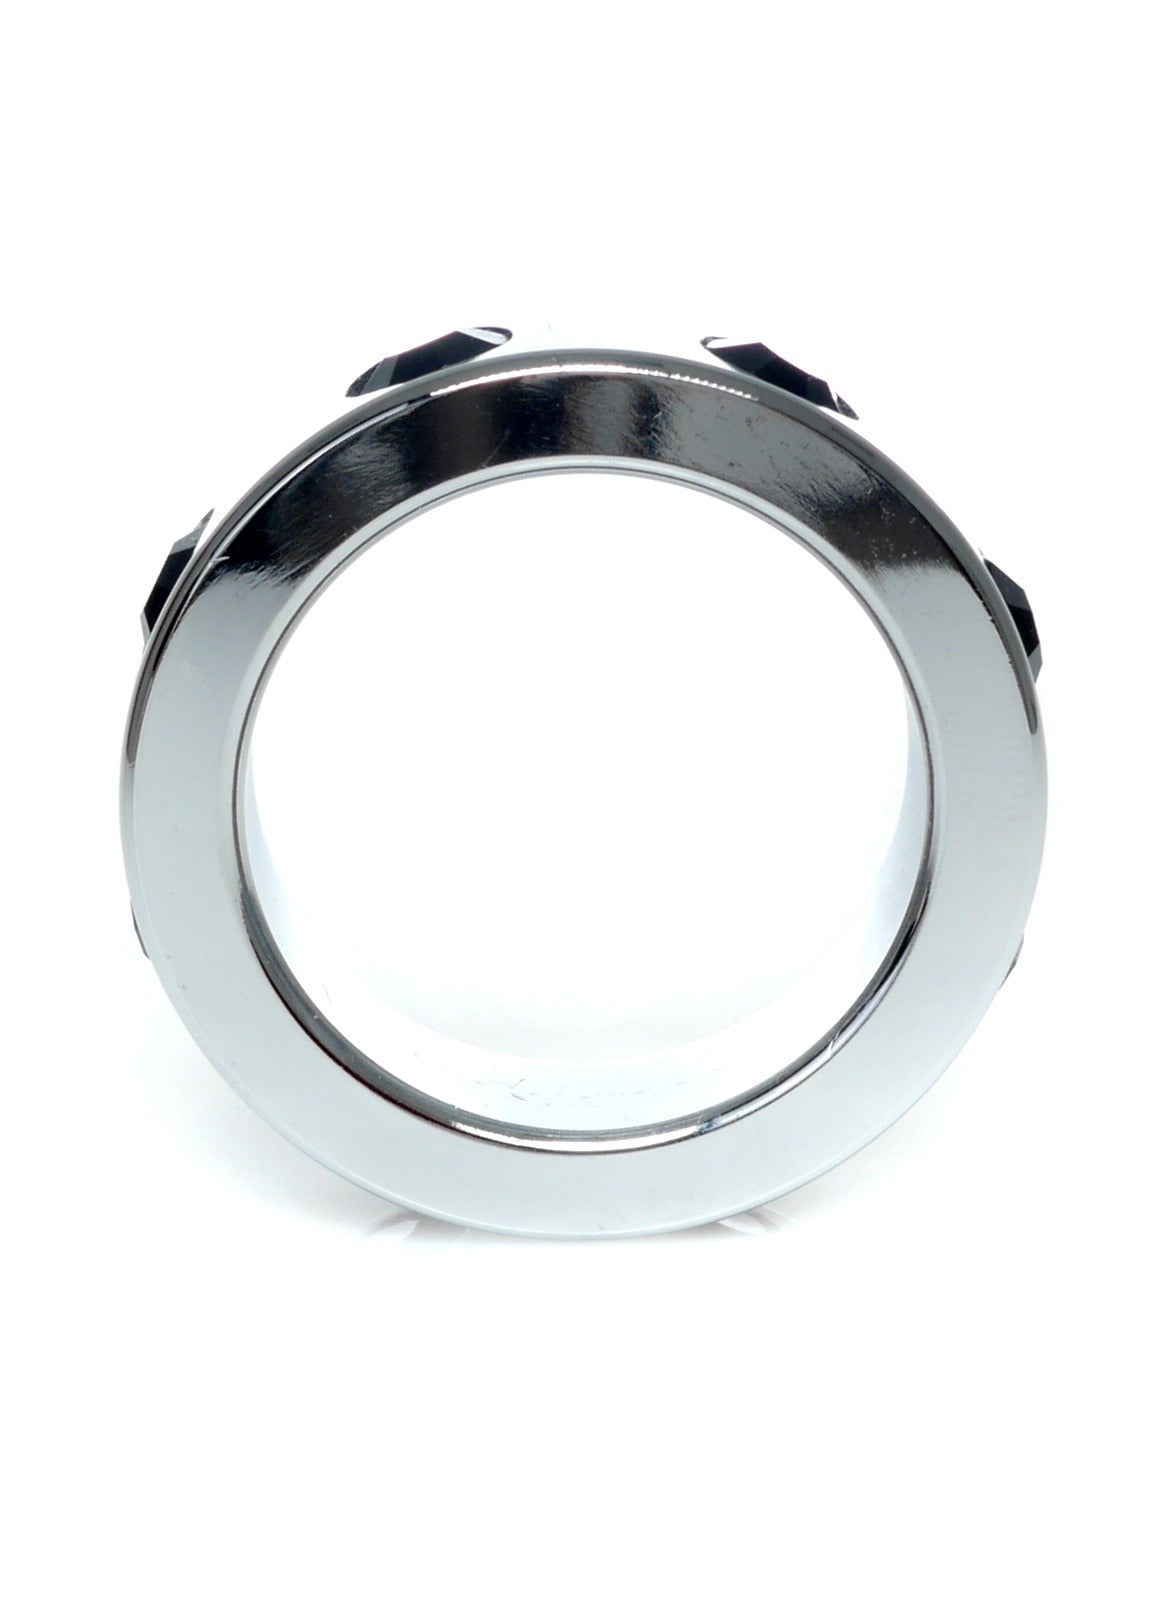 Bossoftoys - 64-00120 - Stainless steel - Metal Cockring - with Black Diamond stones - Medium size - inner dia 3,5 CM - outer dia 4,5 CM